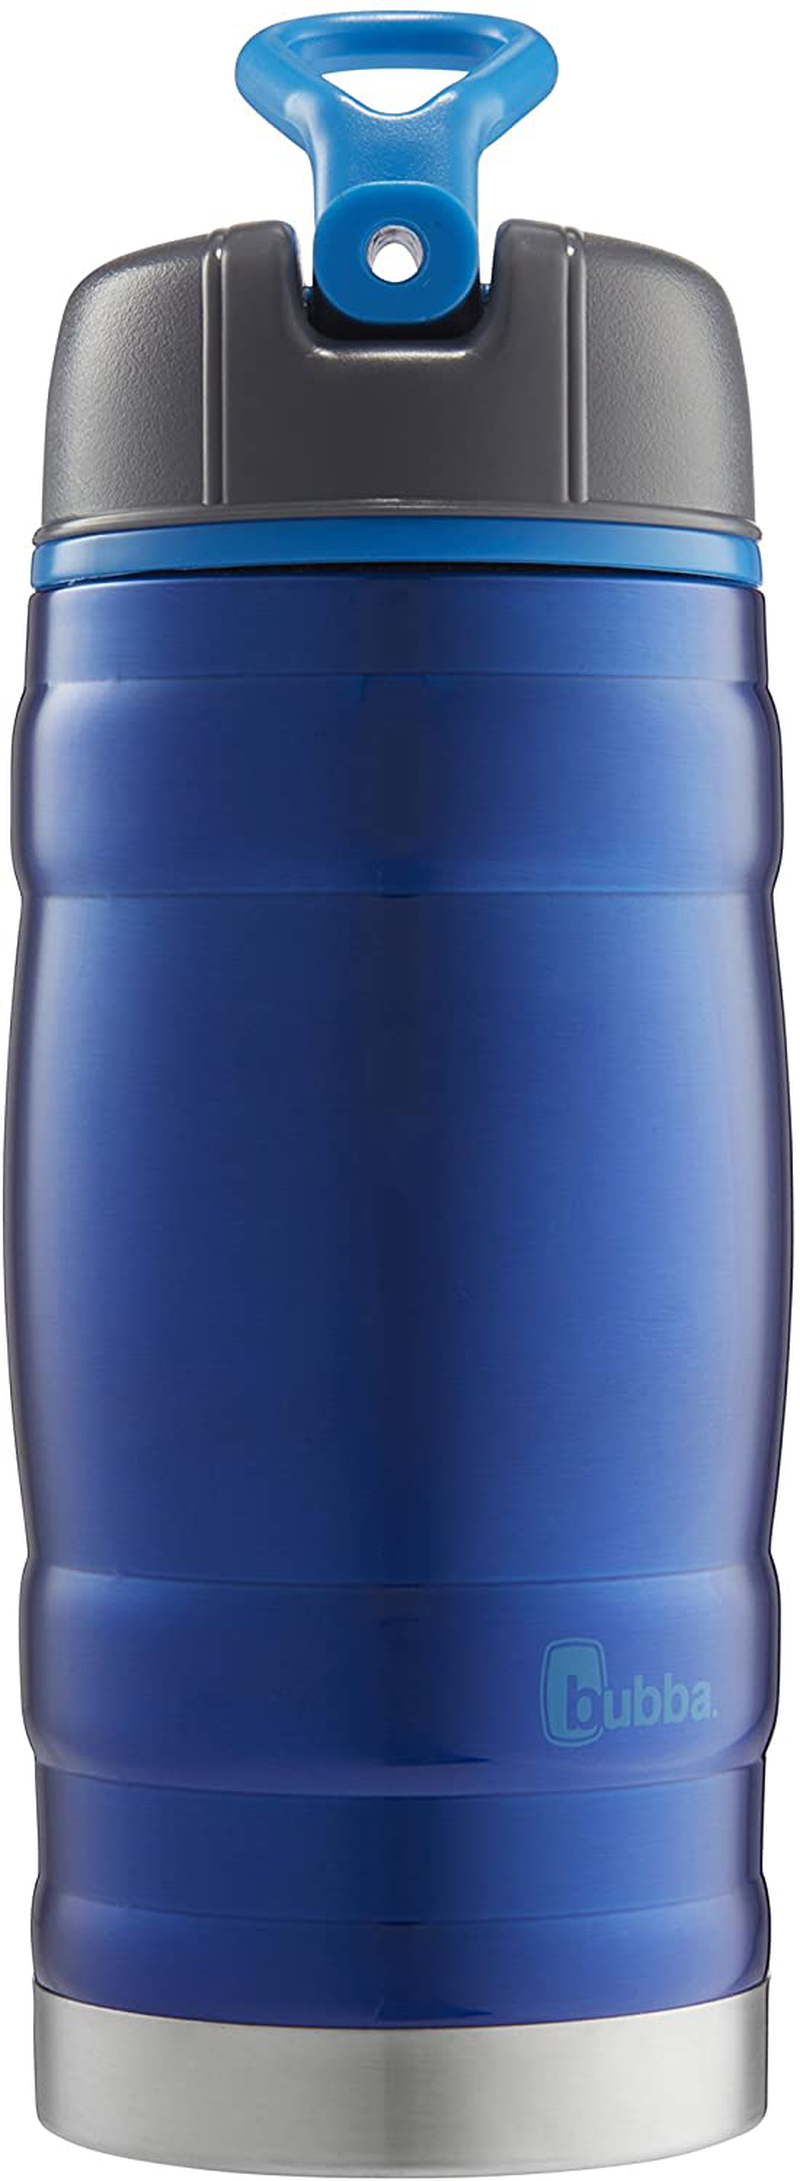 bubba Hero Sport Kids Insulated Stainless Steel Water Bottle with Flip-Up Straw, 12 oz., Blue